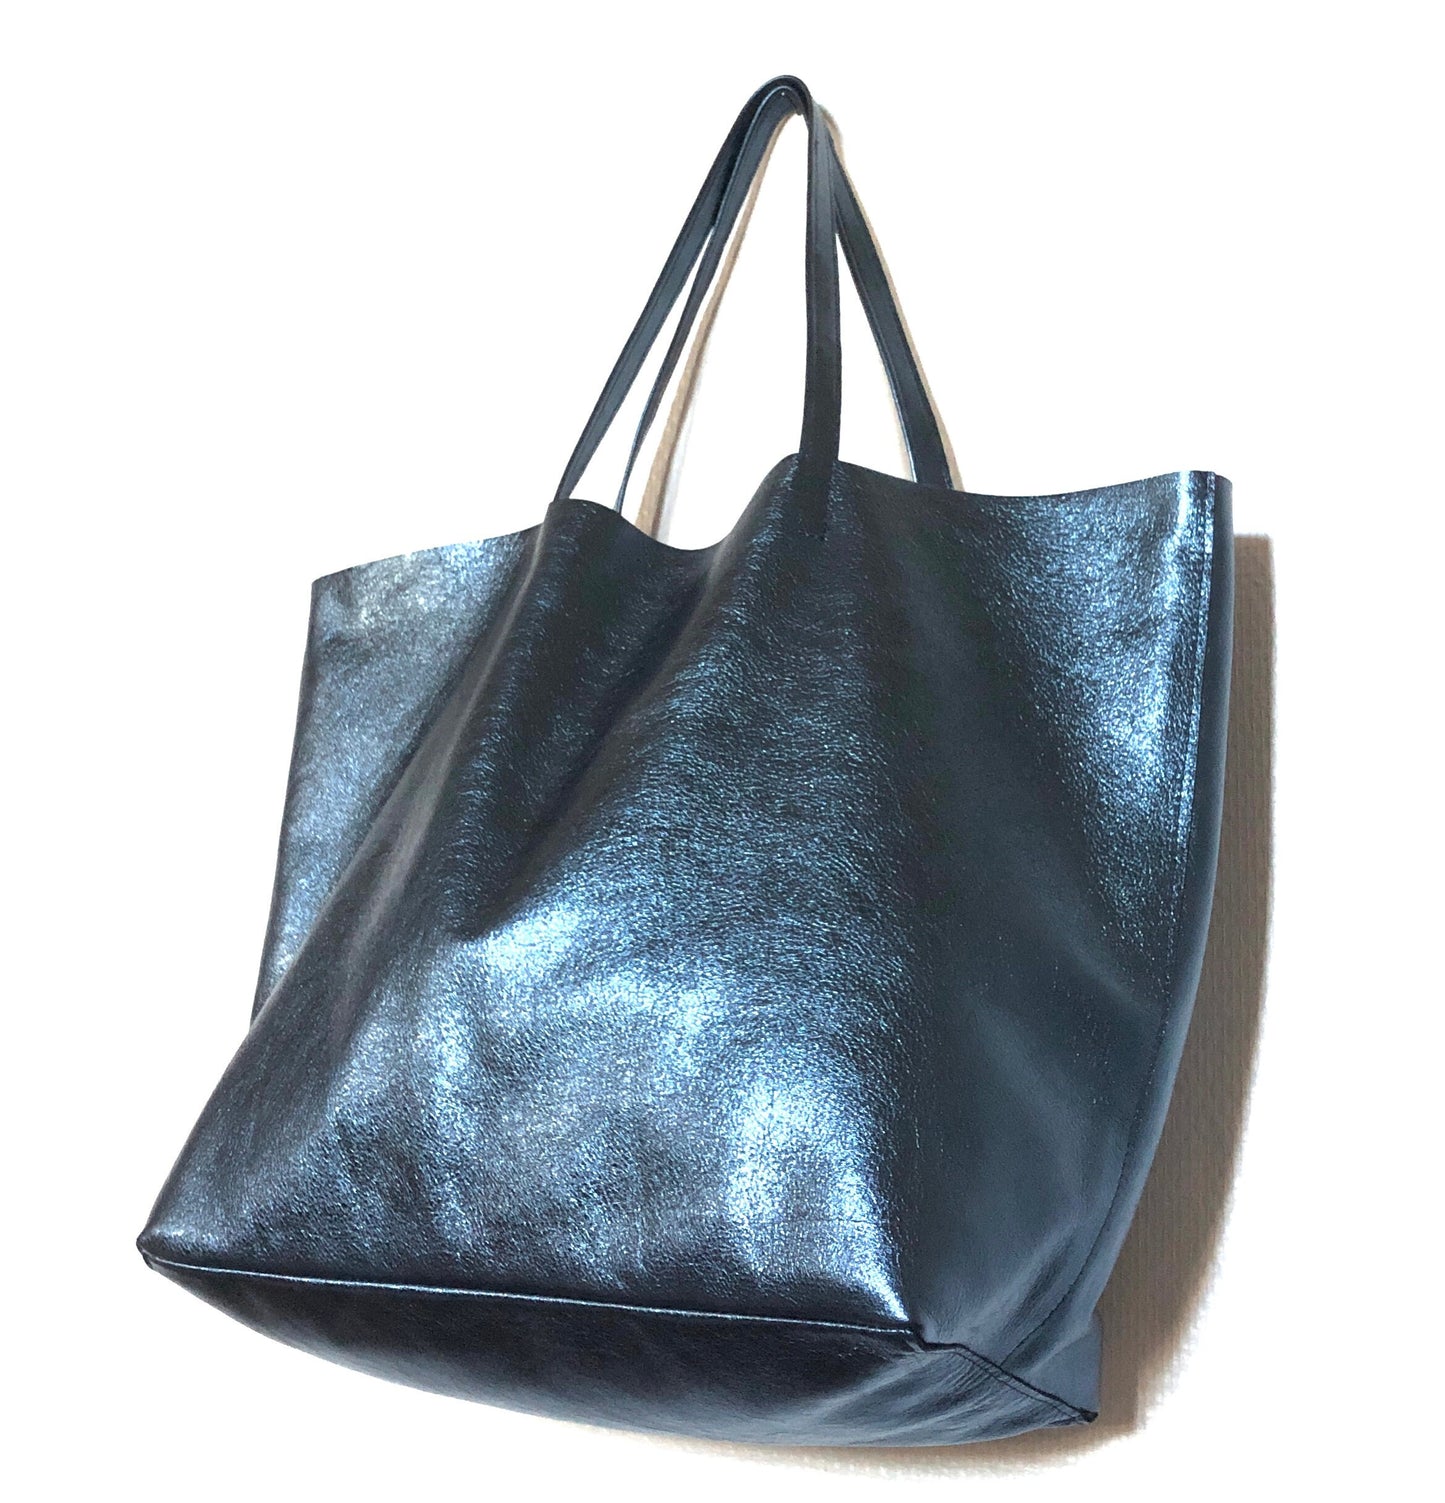 Metallic navy Italian leather large tote bag large navy sparkle leather oversize tote everyday leather shoulder purse